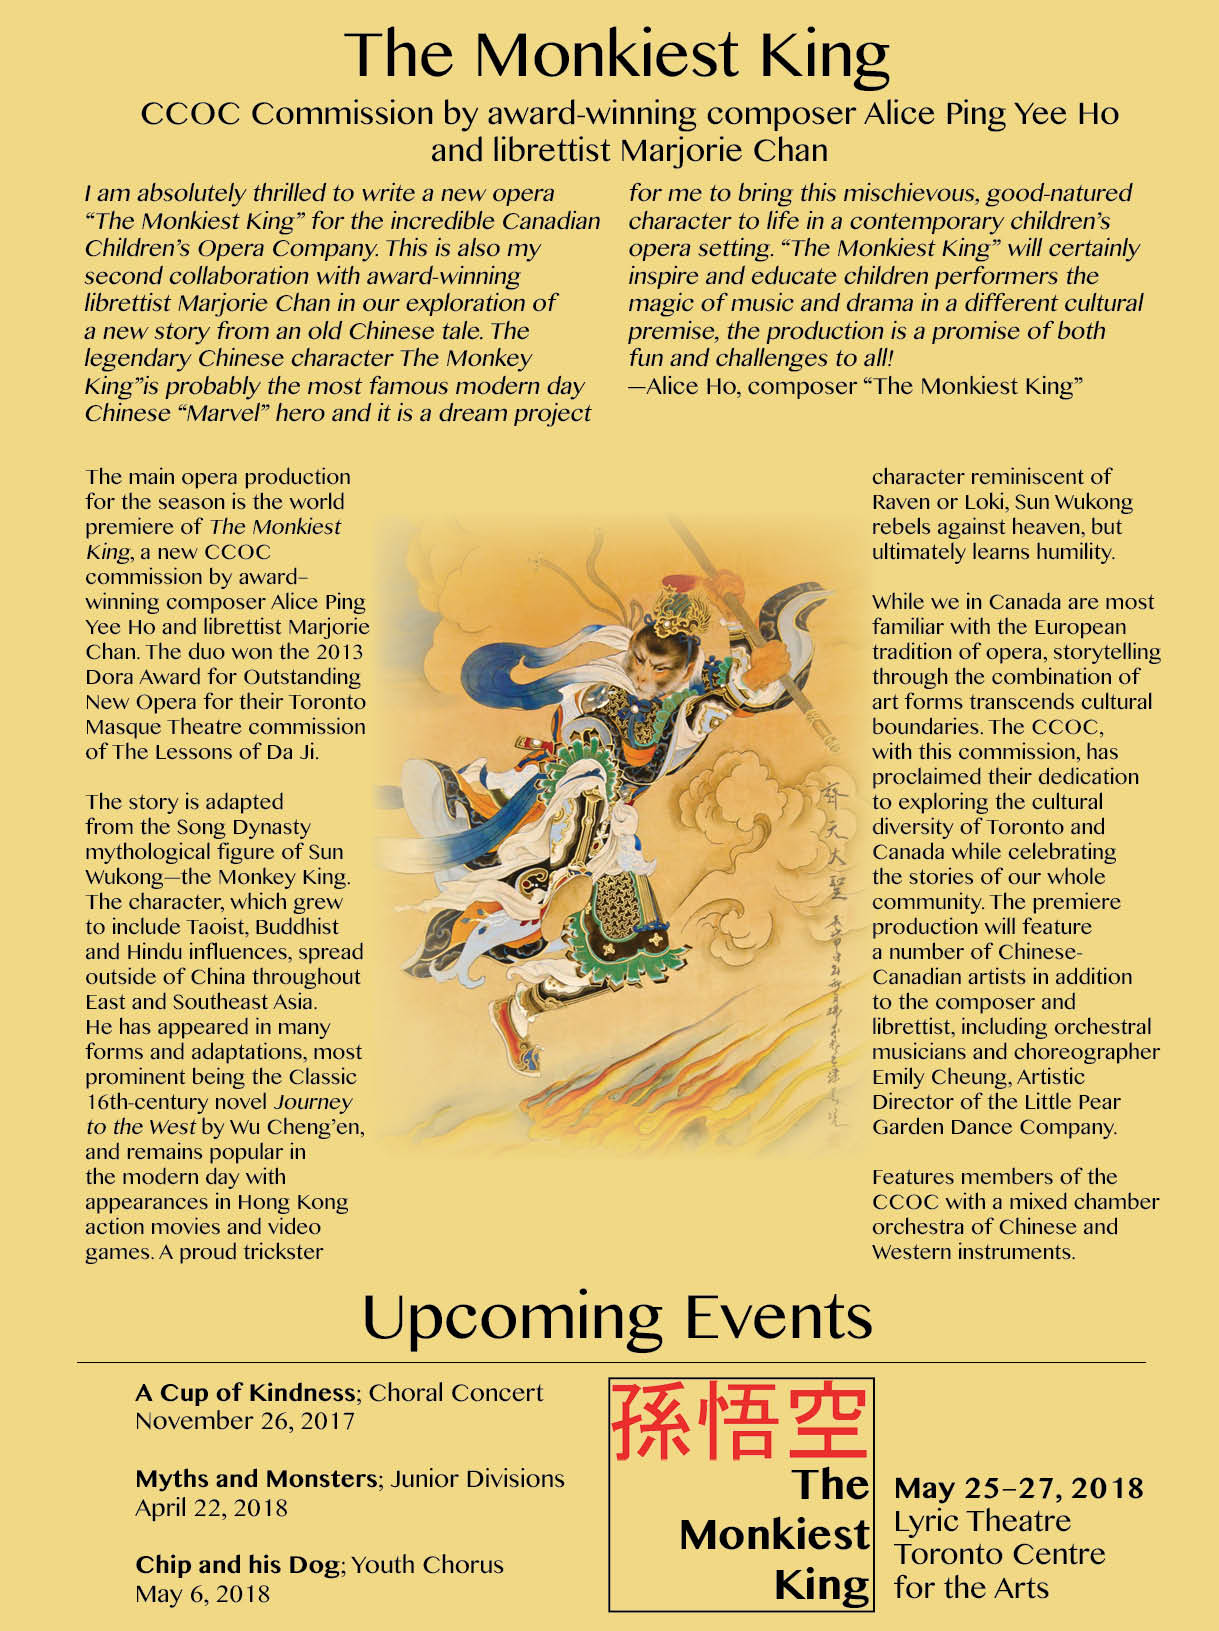 Events page from a book